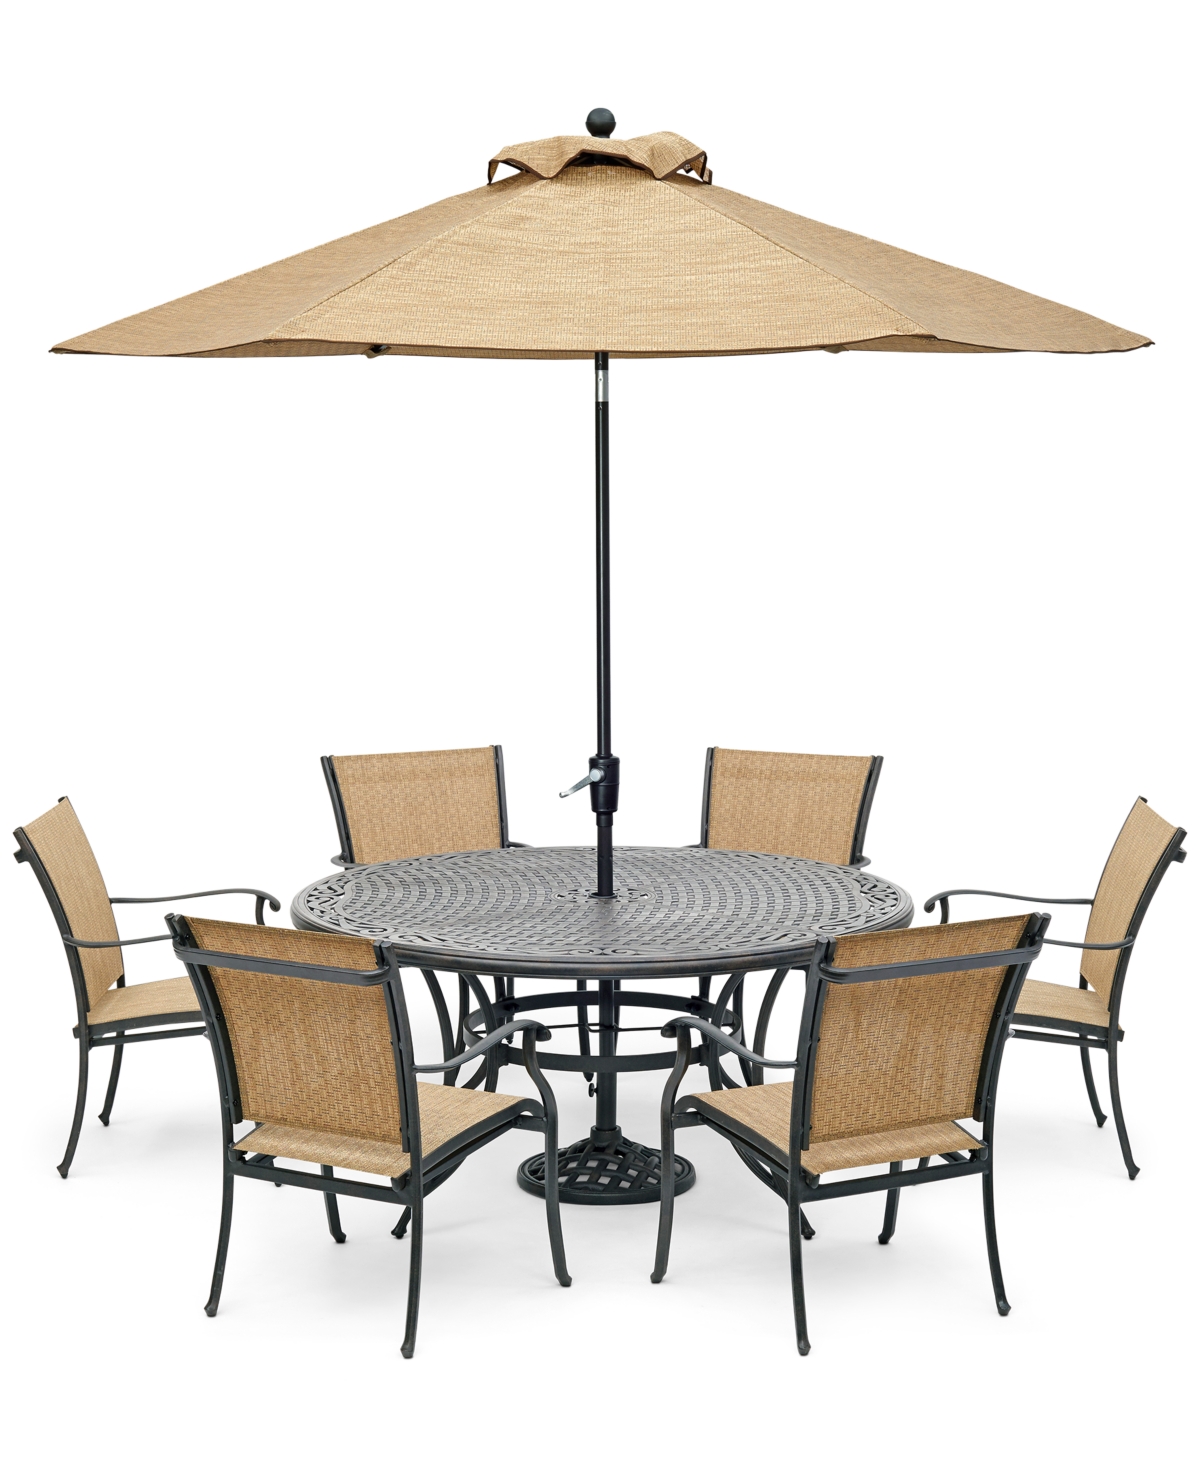 Beachmont Ii Outdoor 7-Pc. Dining Set (60 Round Table and 6 Dining Chairs), Created for Macys